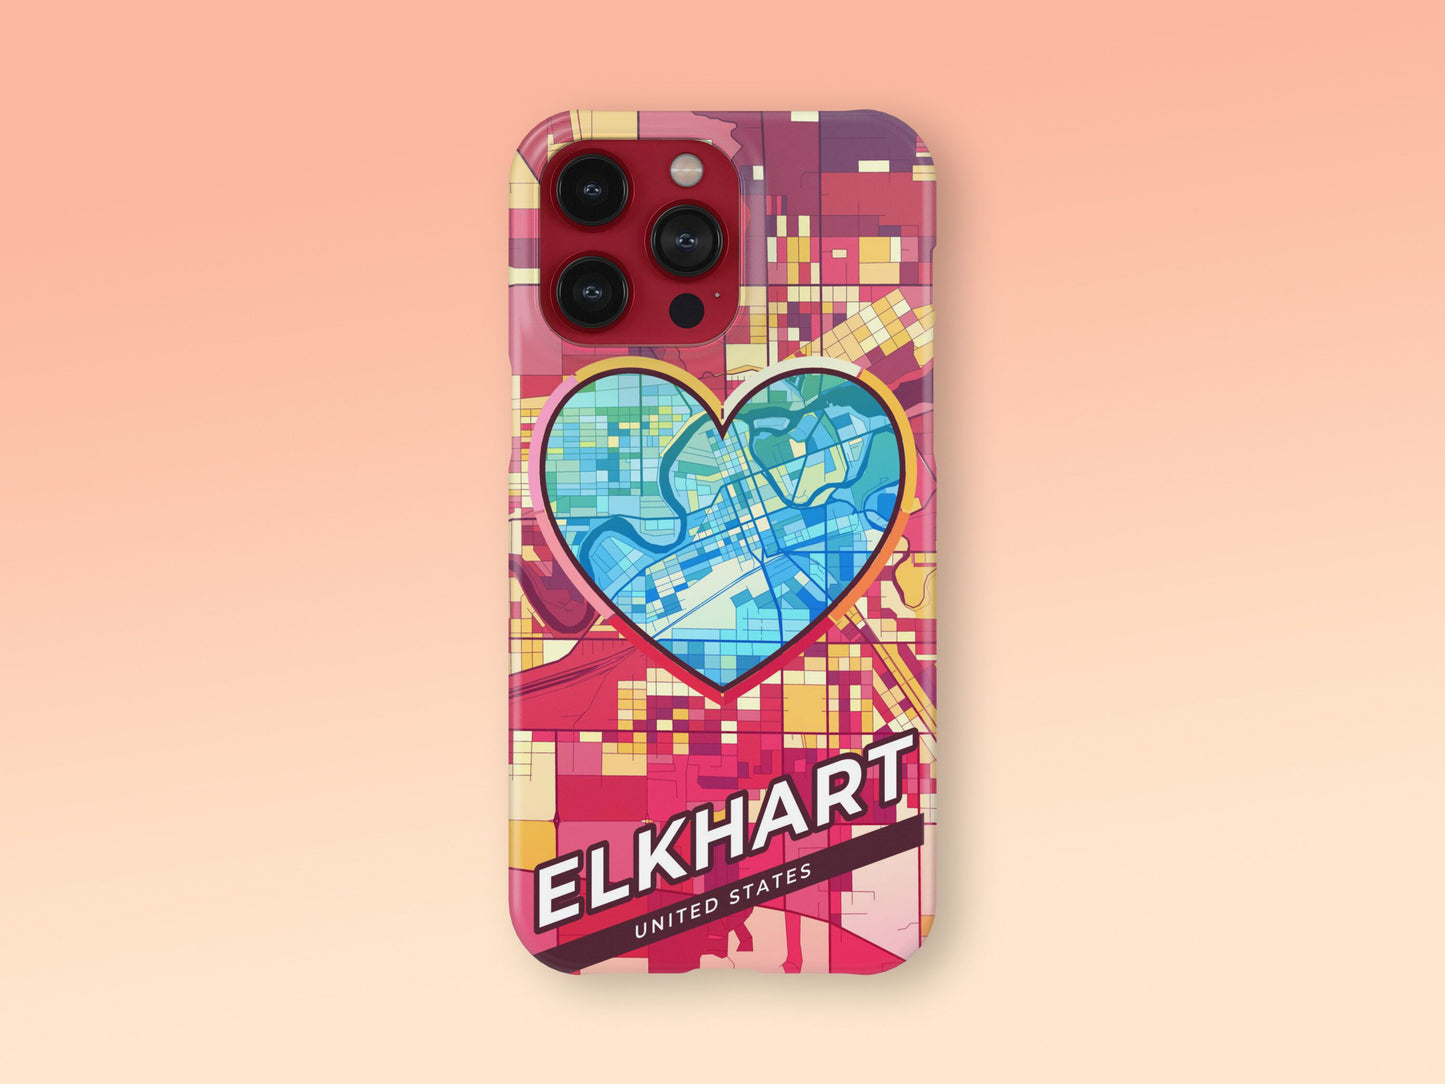 Elkhart Indiana slim phone case with colorful icon. Birthday, wedding or housewarming gift. Couple match cases. 2